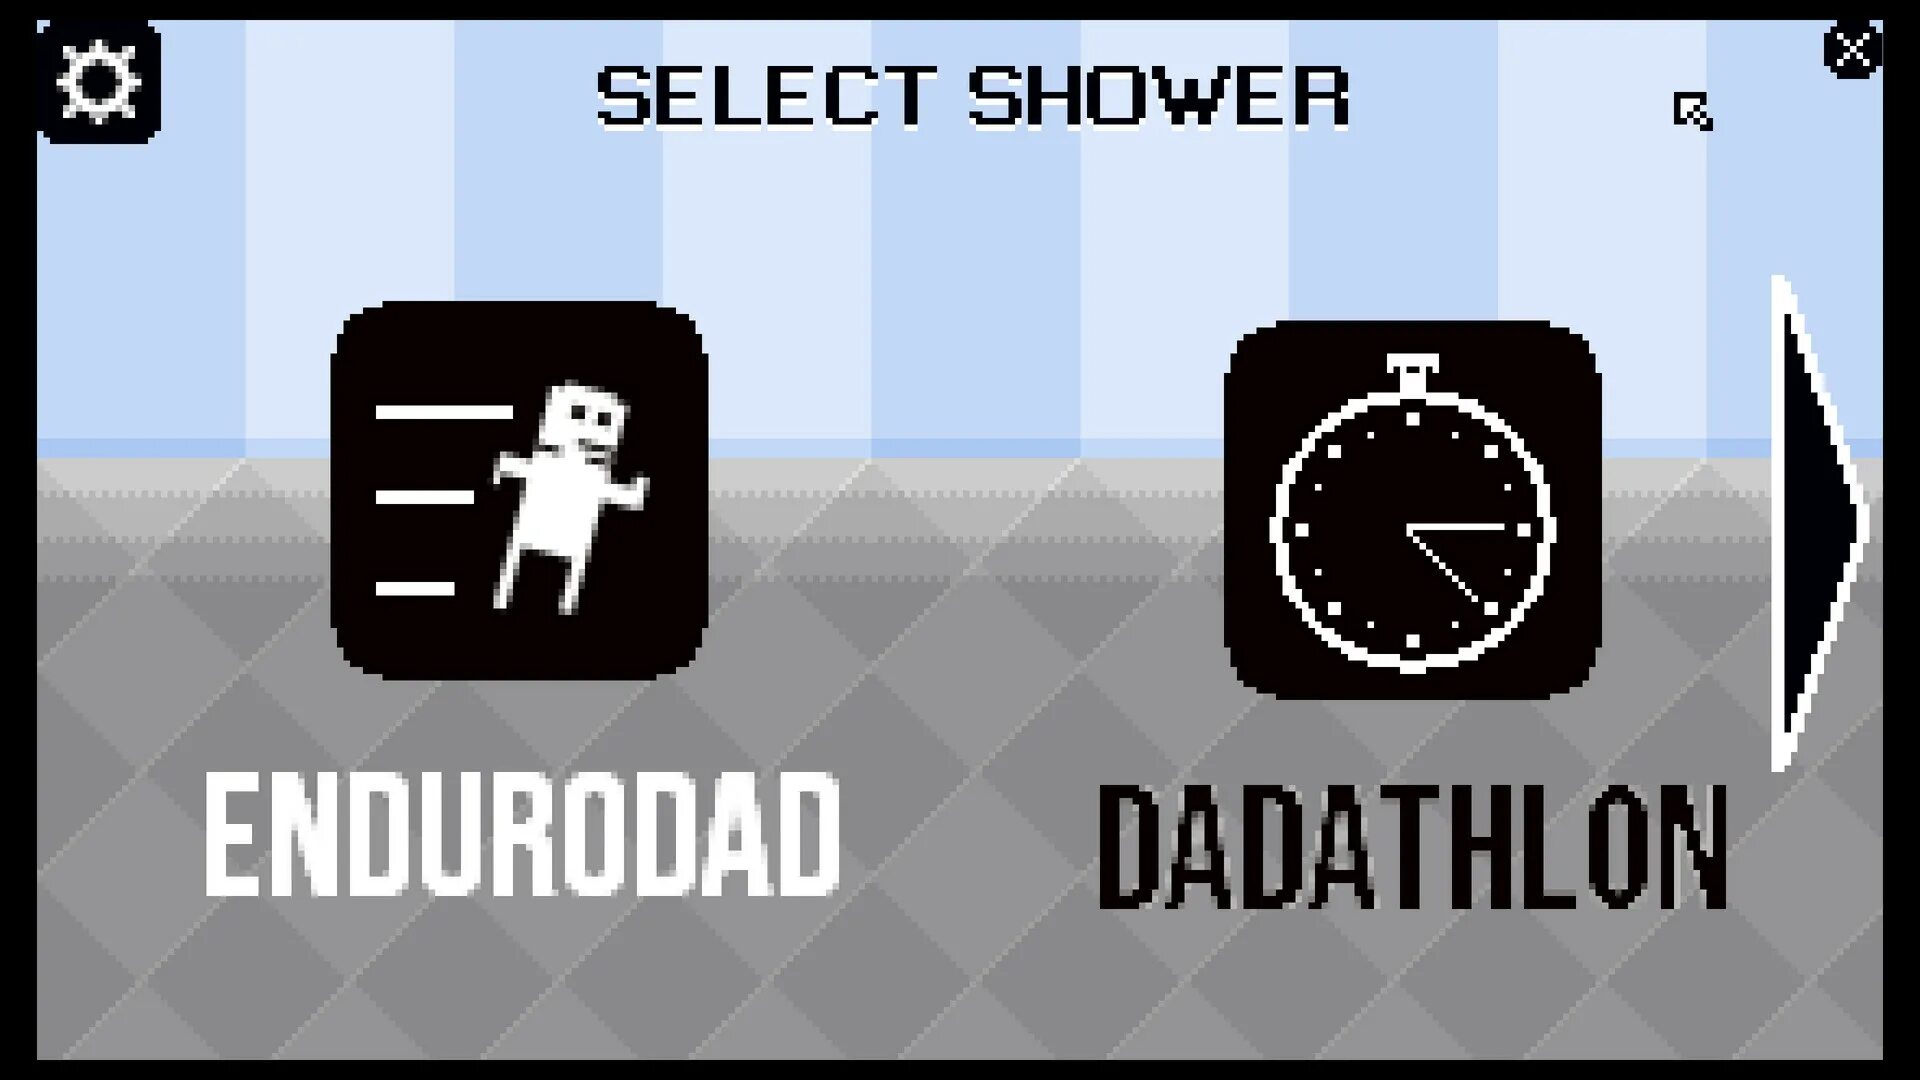 Shower with your dad Simulator. Игра Cubicles. Shower with your dad Simulator 2015. Shower with your dad Simulator 2015: do you still Shower with your dad. Shower dad